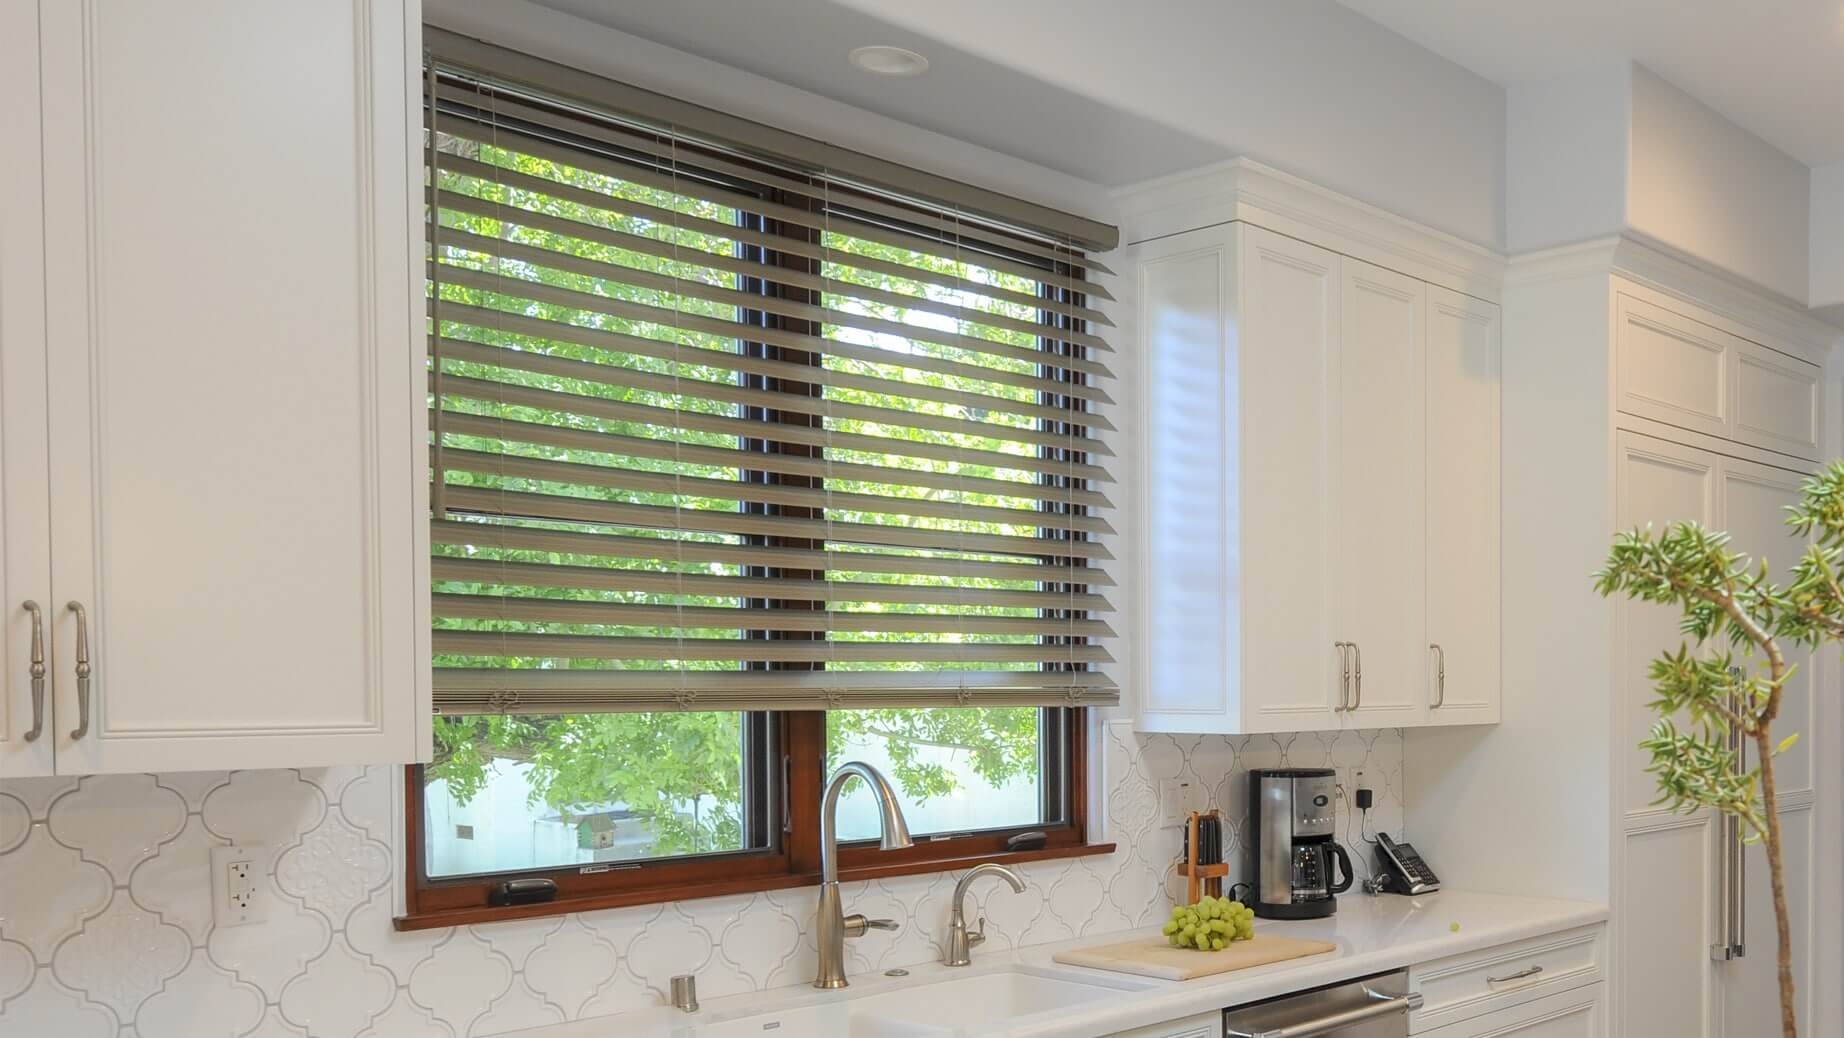 blinds | window treatments Brentwood, MO